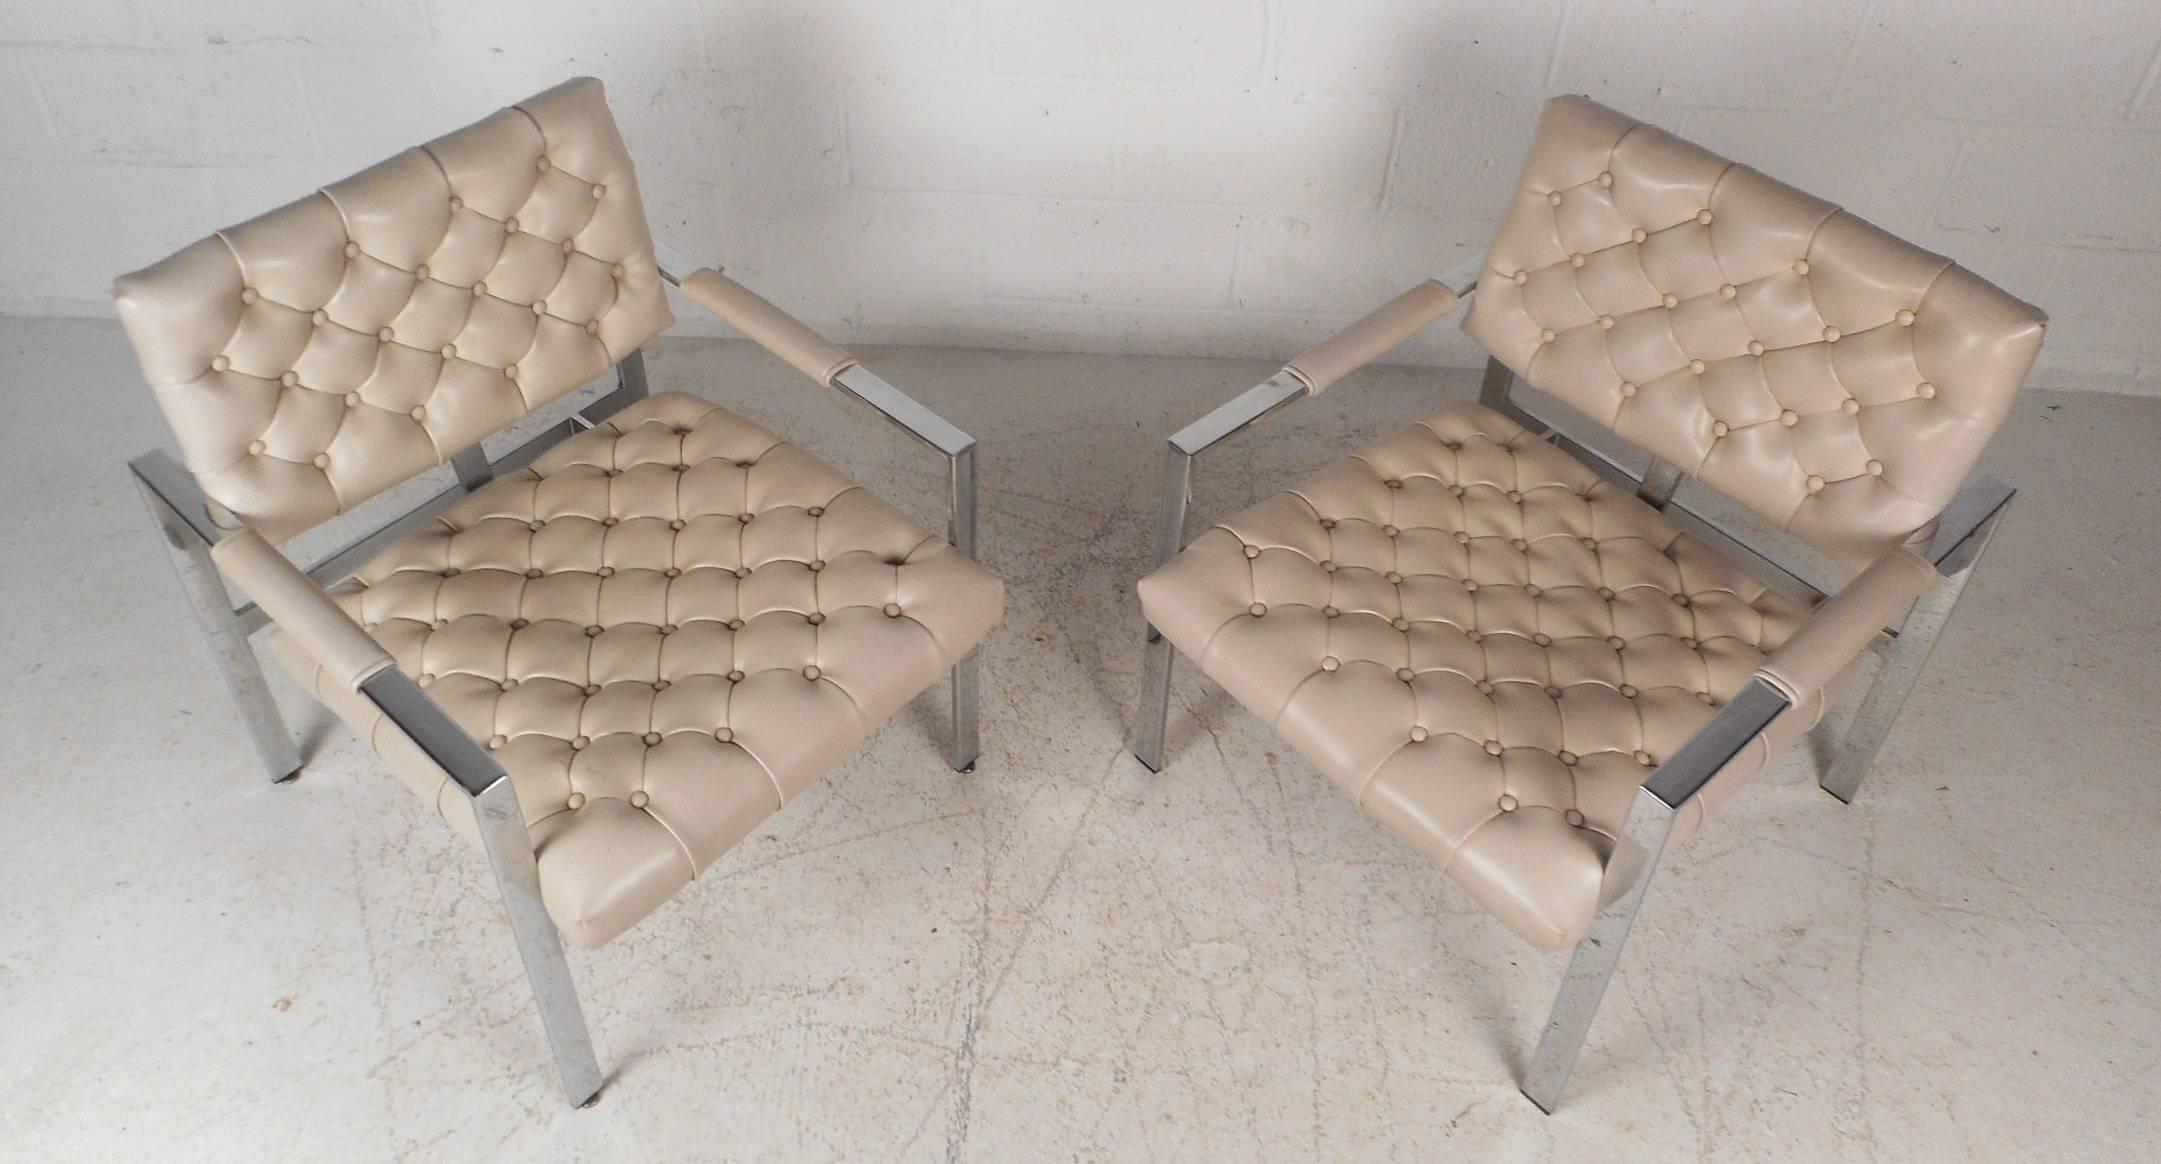 This gorgeous pair of vintage modern lounge chairs feature a heavy flat bar chrome frame with off-white tufted vinyl upholstery. The sleek design ensures comfort with padded arm rests and a floating style backrest. These wide Mid-Century armchairs